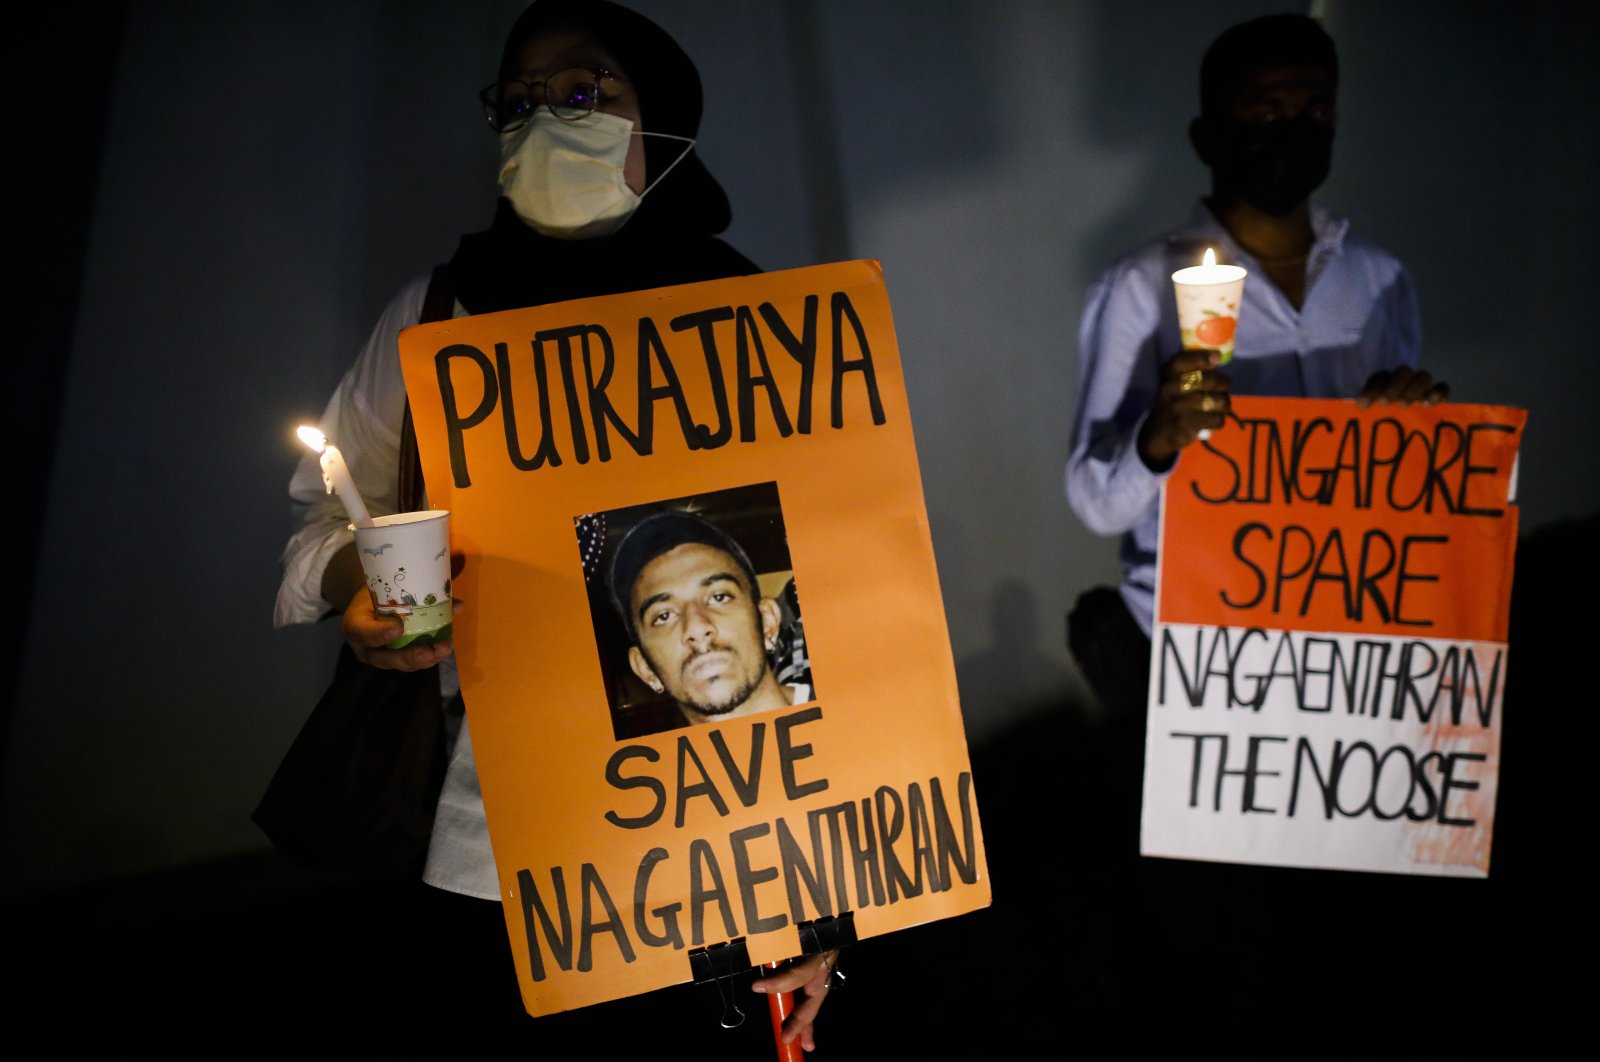 Activists hold placards and candles during a candlelight vigil against the death penalty for Malaysian national Nagaenthran K. Dharmalingam, who was convicted of a drug offence 11 years ago in Singapore but diagnosed as intellectually disabled, Kuala Lumpur, Malaysia, April 26, 2022. (EPA Photo)